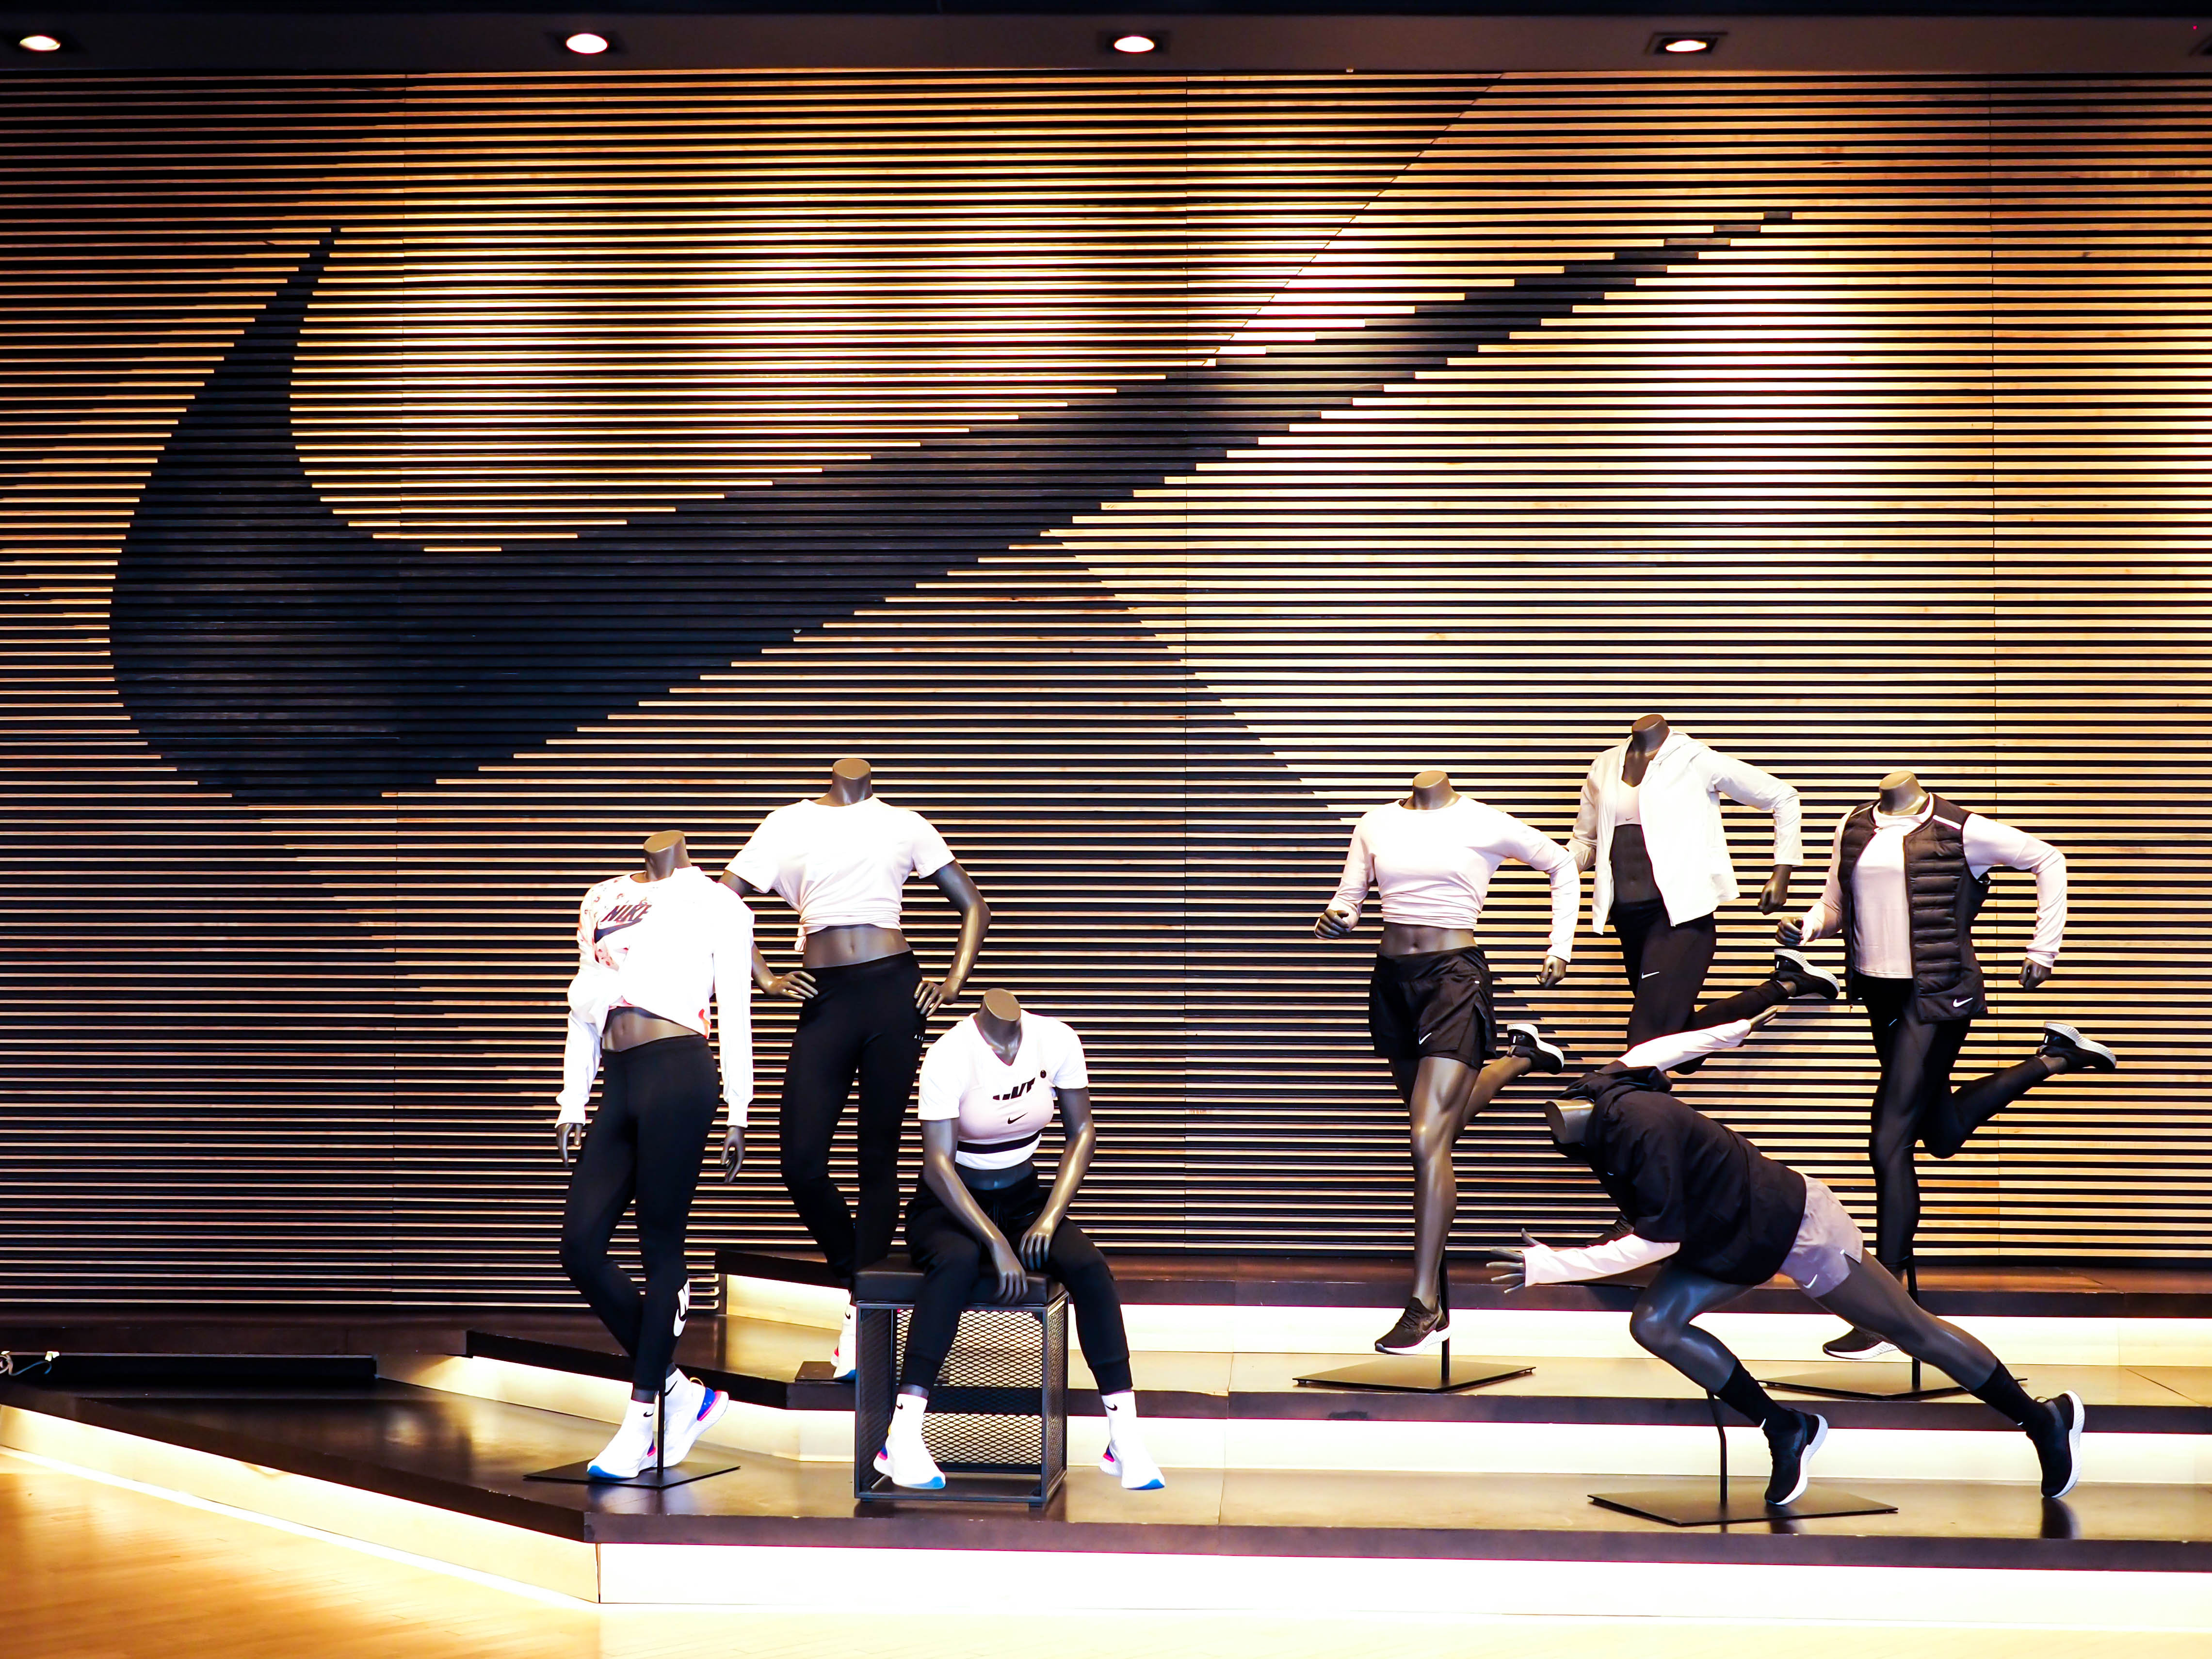 Nike storefront with clothing display and several mannequins demonstrates Nikes branding. 